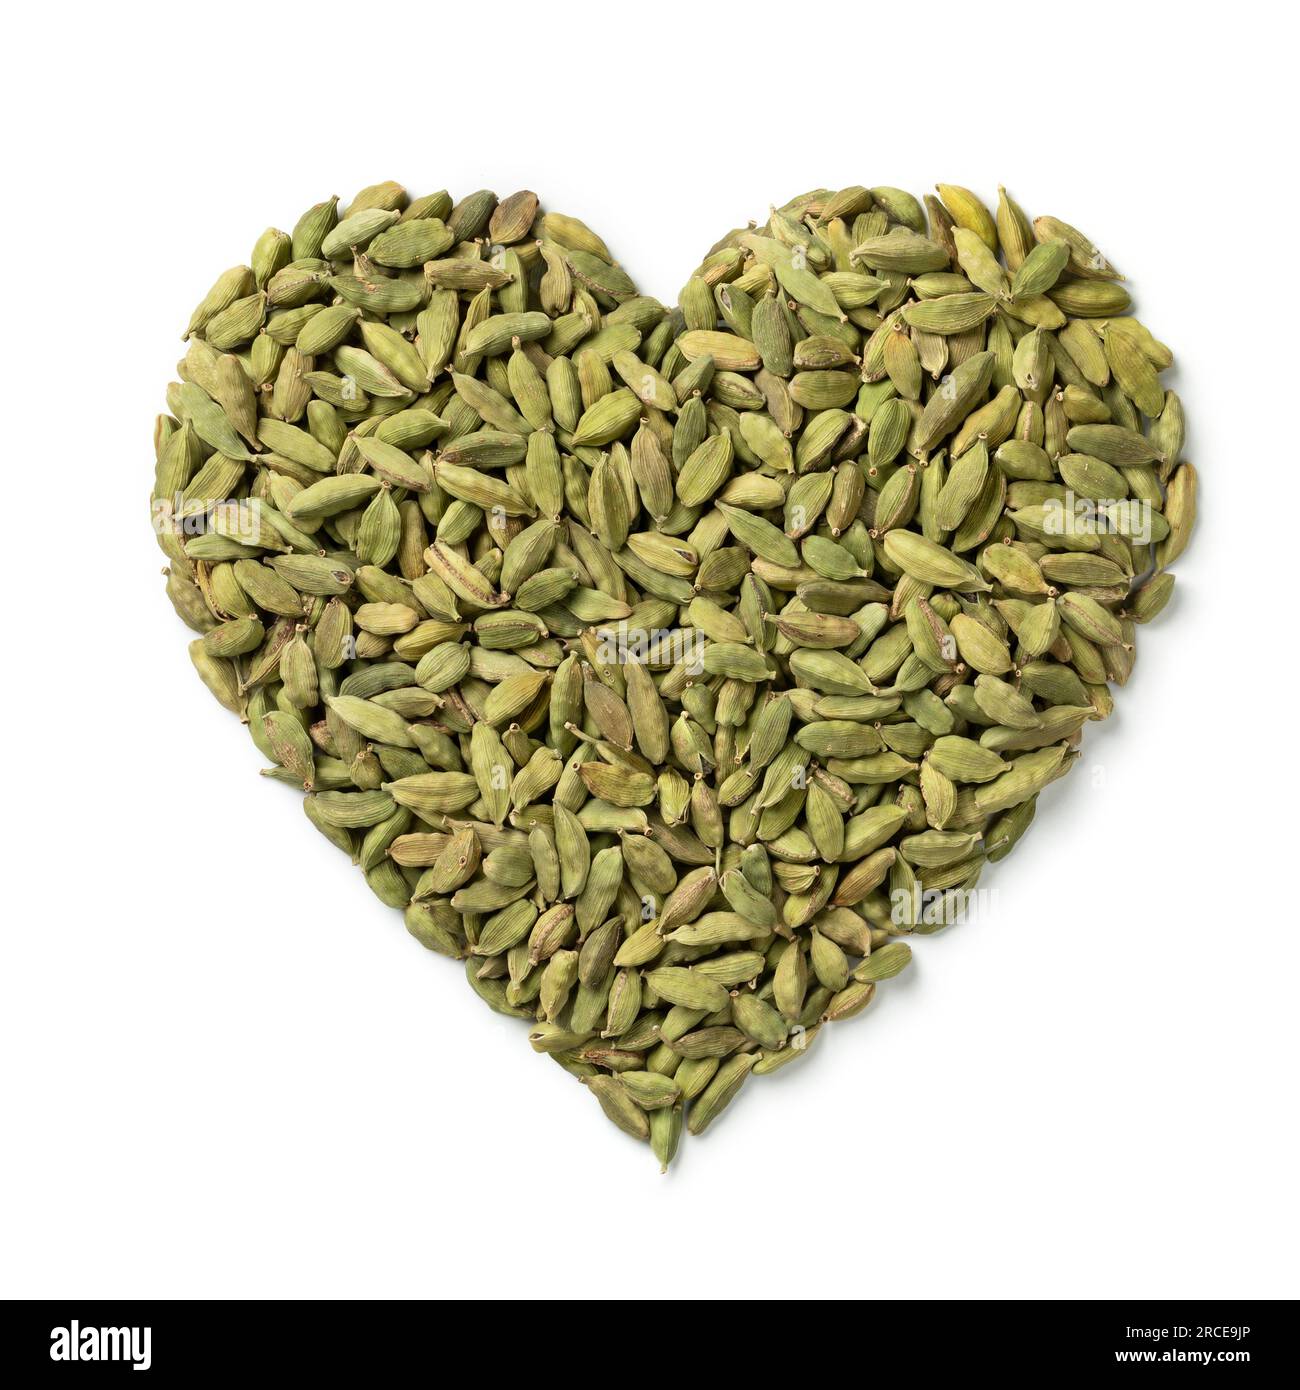 Green true Cardamom pods in heart shape isolated on white background Stock Photo